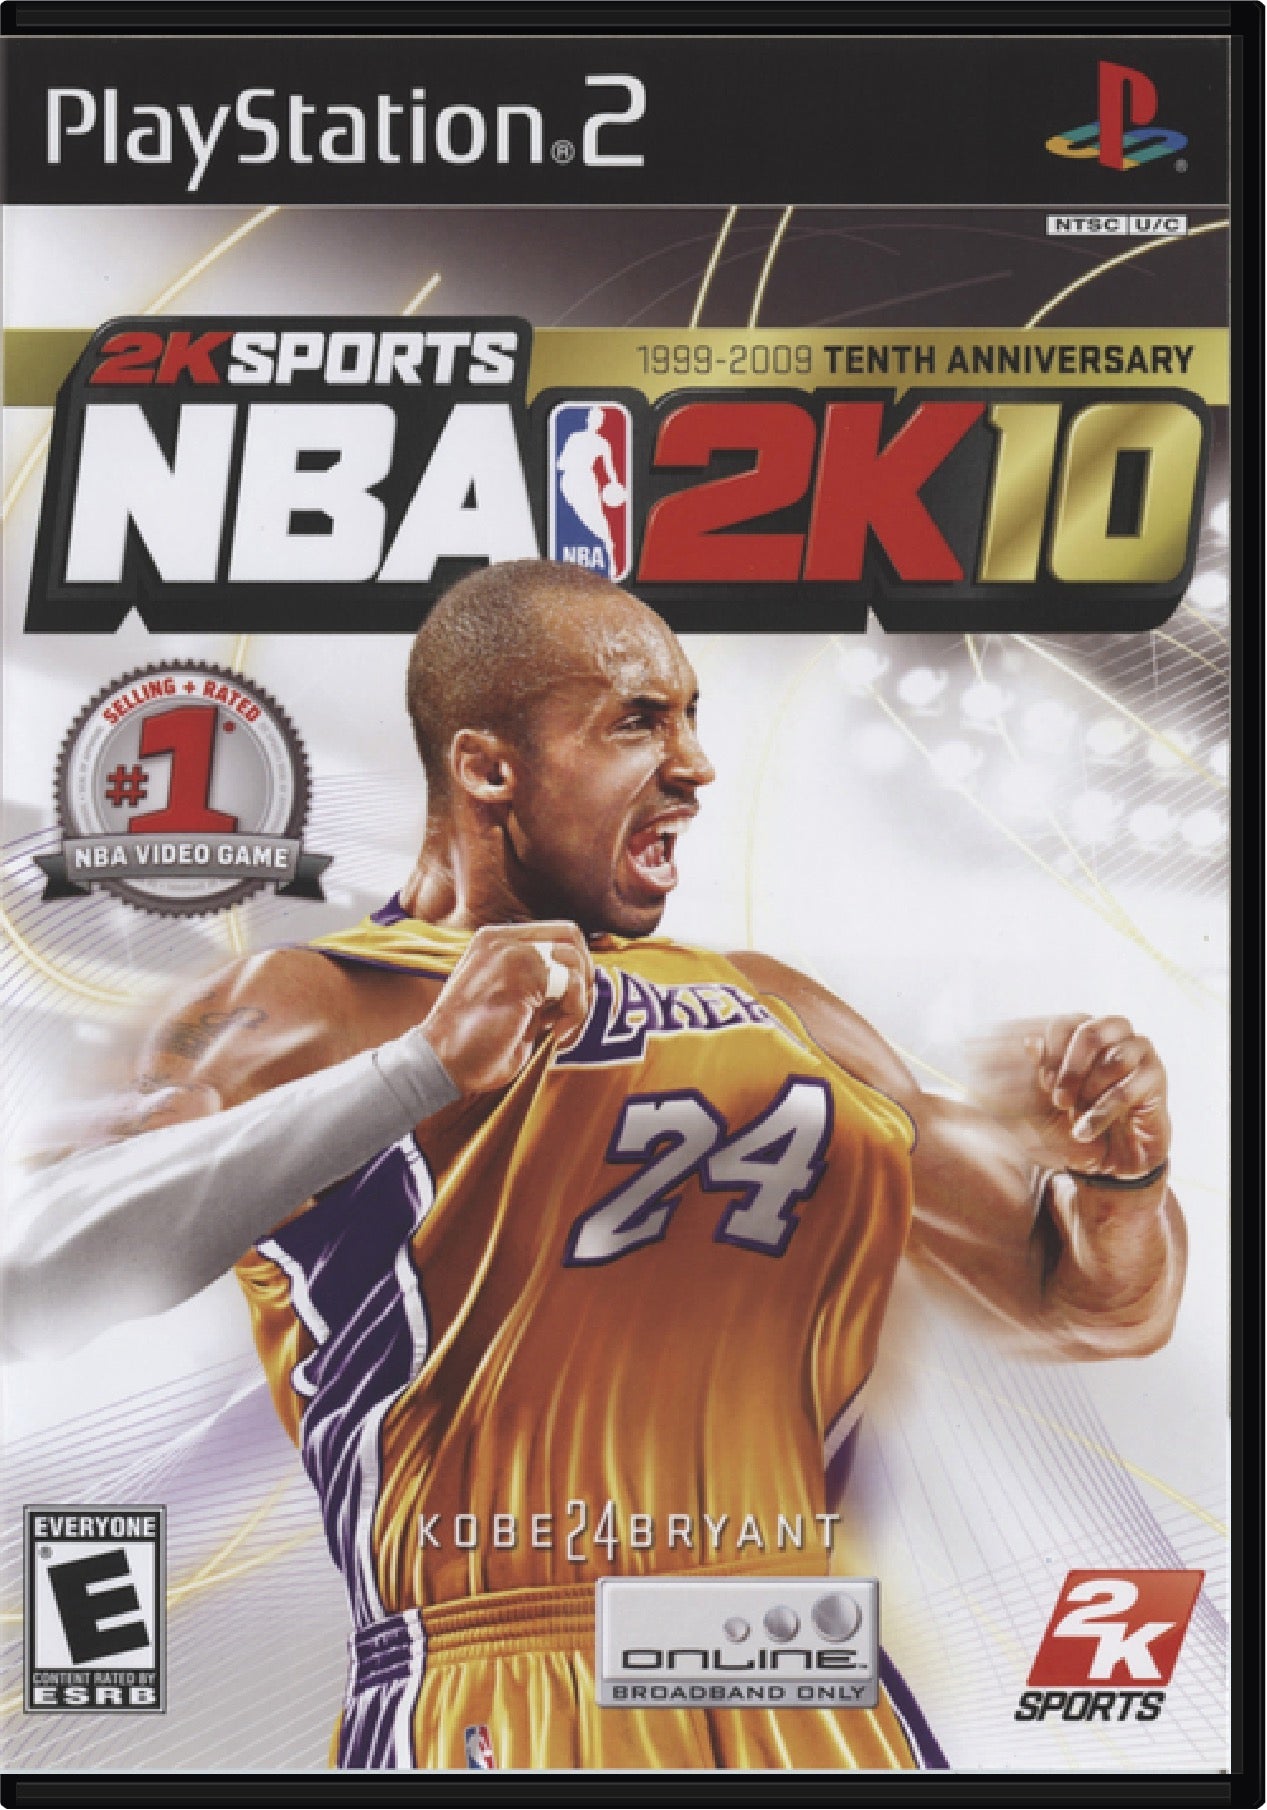 NBA 2K10 Cover Art and Product Photo